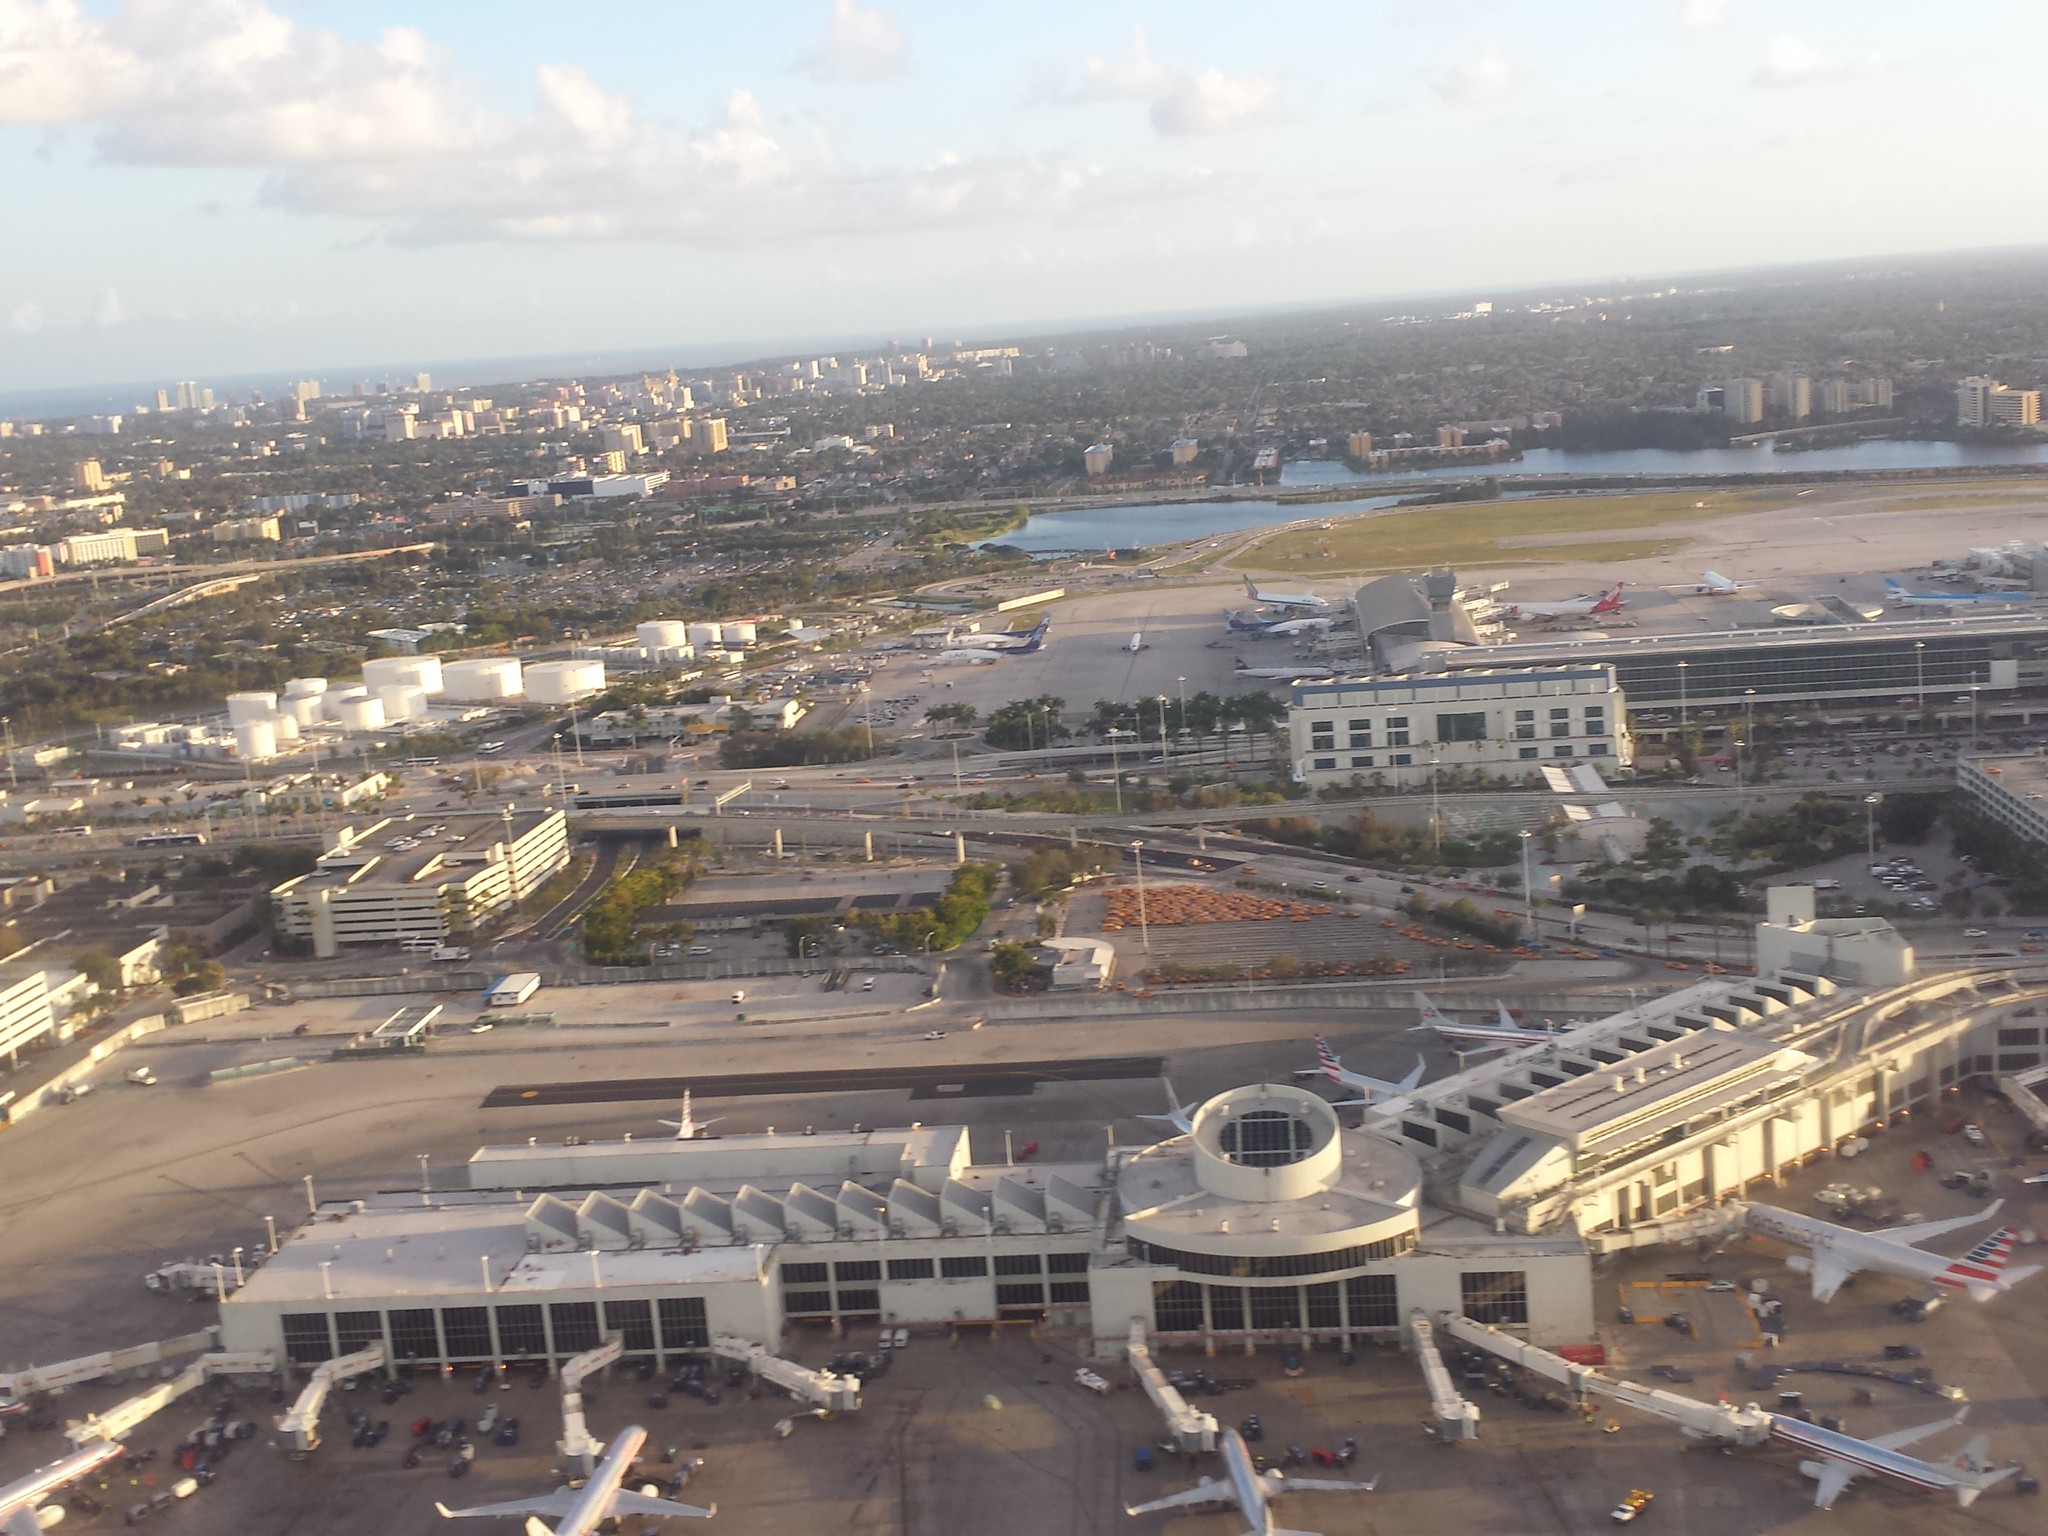 Looking down on Miami airport